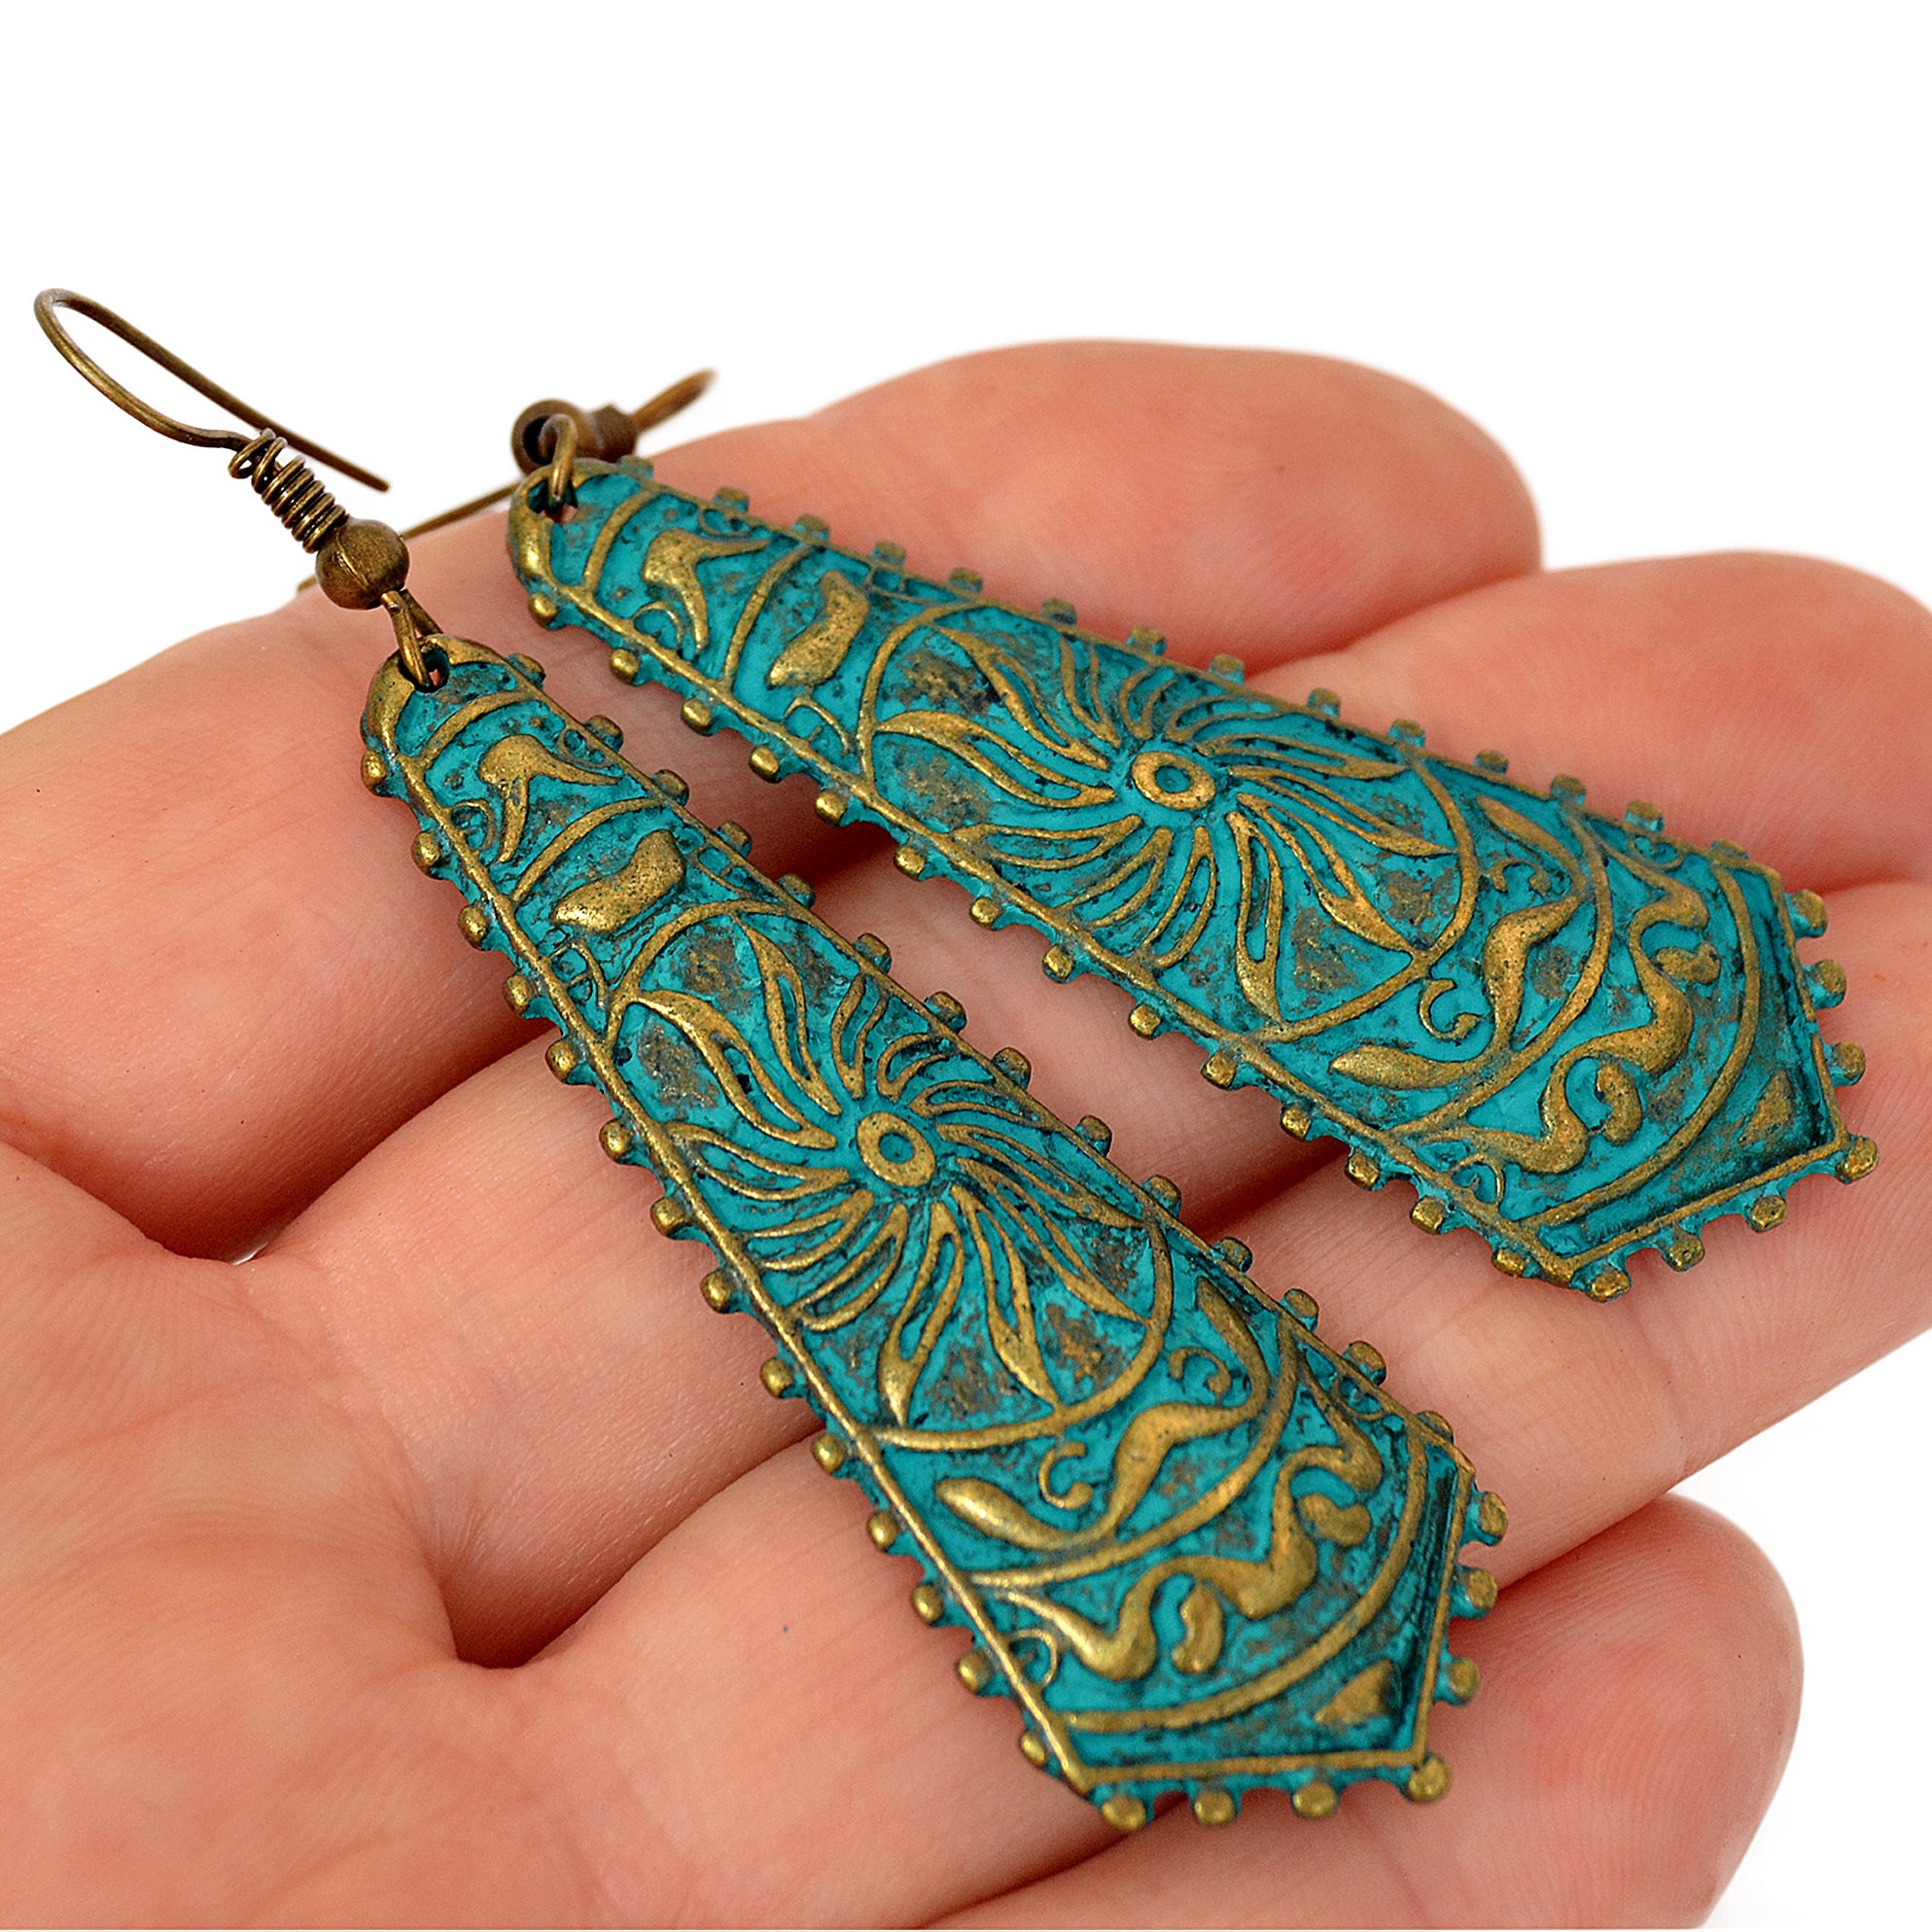 Drop shield earrings with etched gold sun and green patina on brass